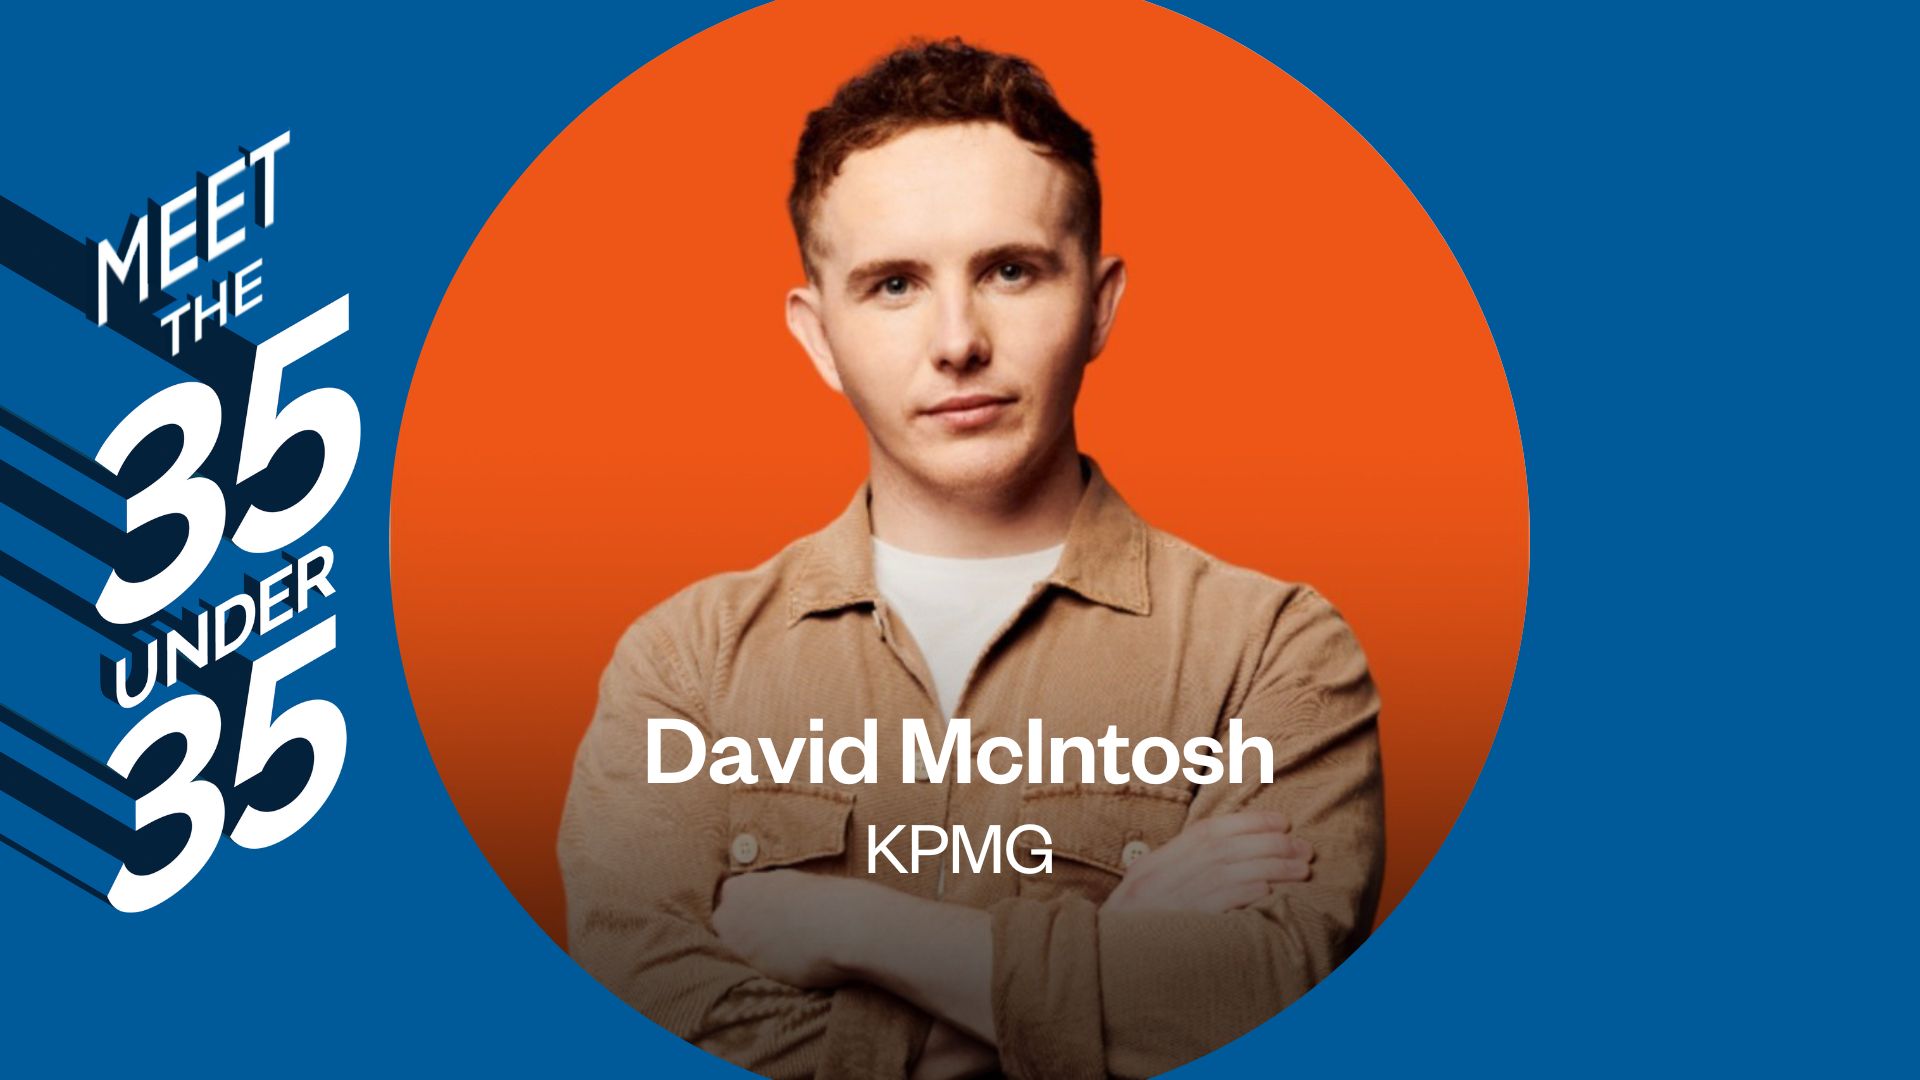 meet the 35 under 35 Q&A with David McIntosh from KPGM front cover